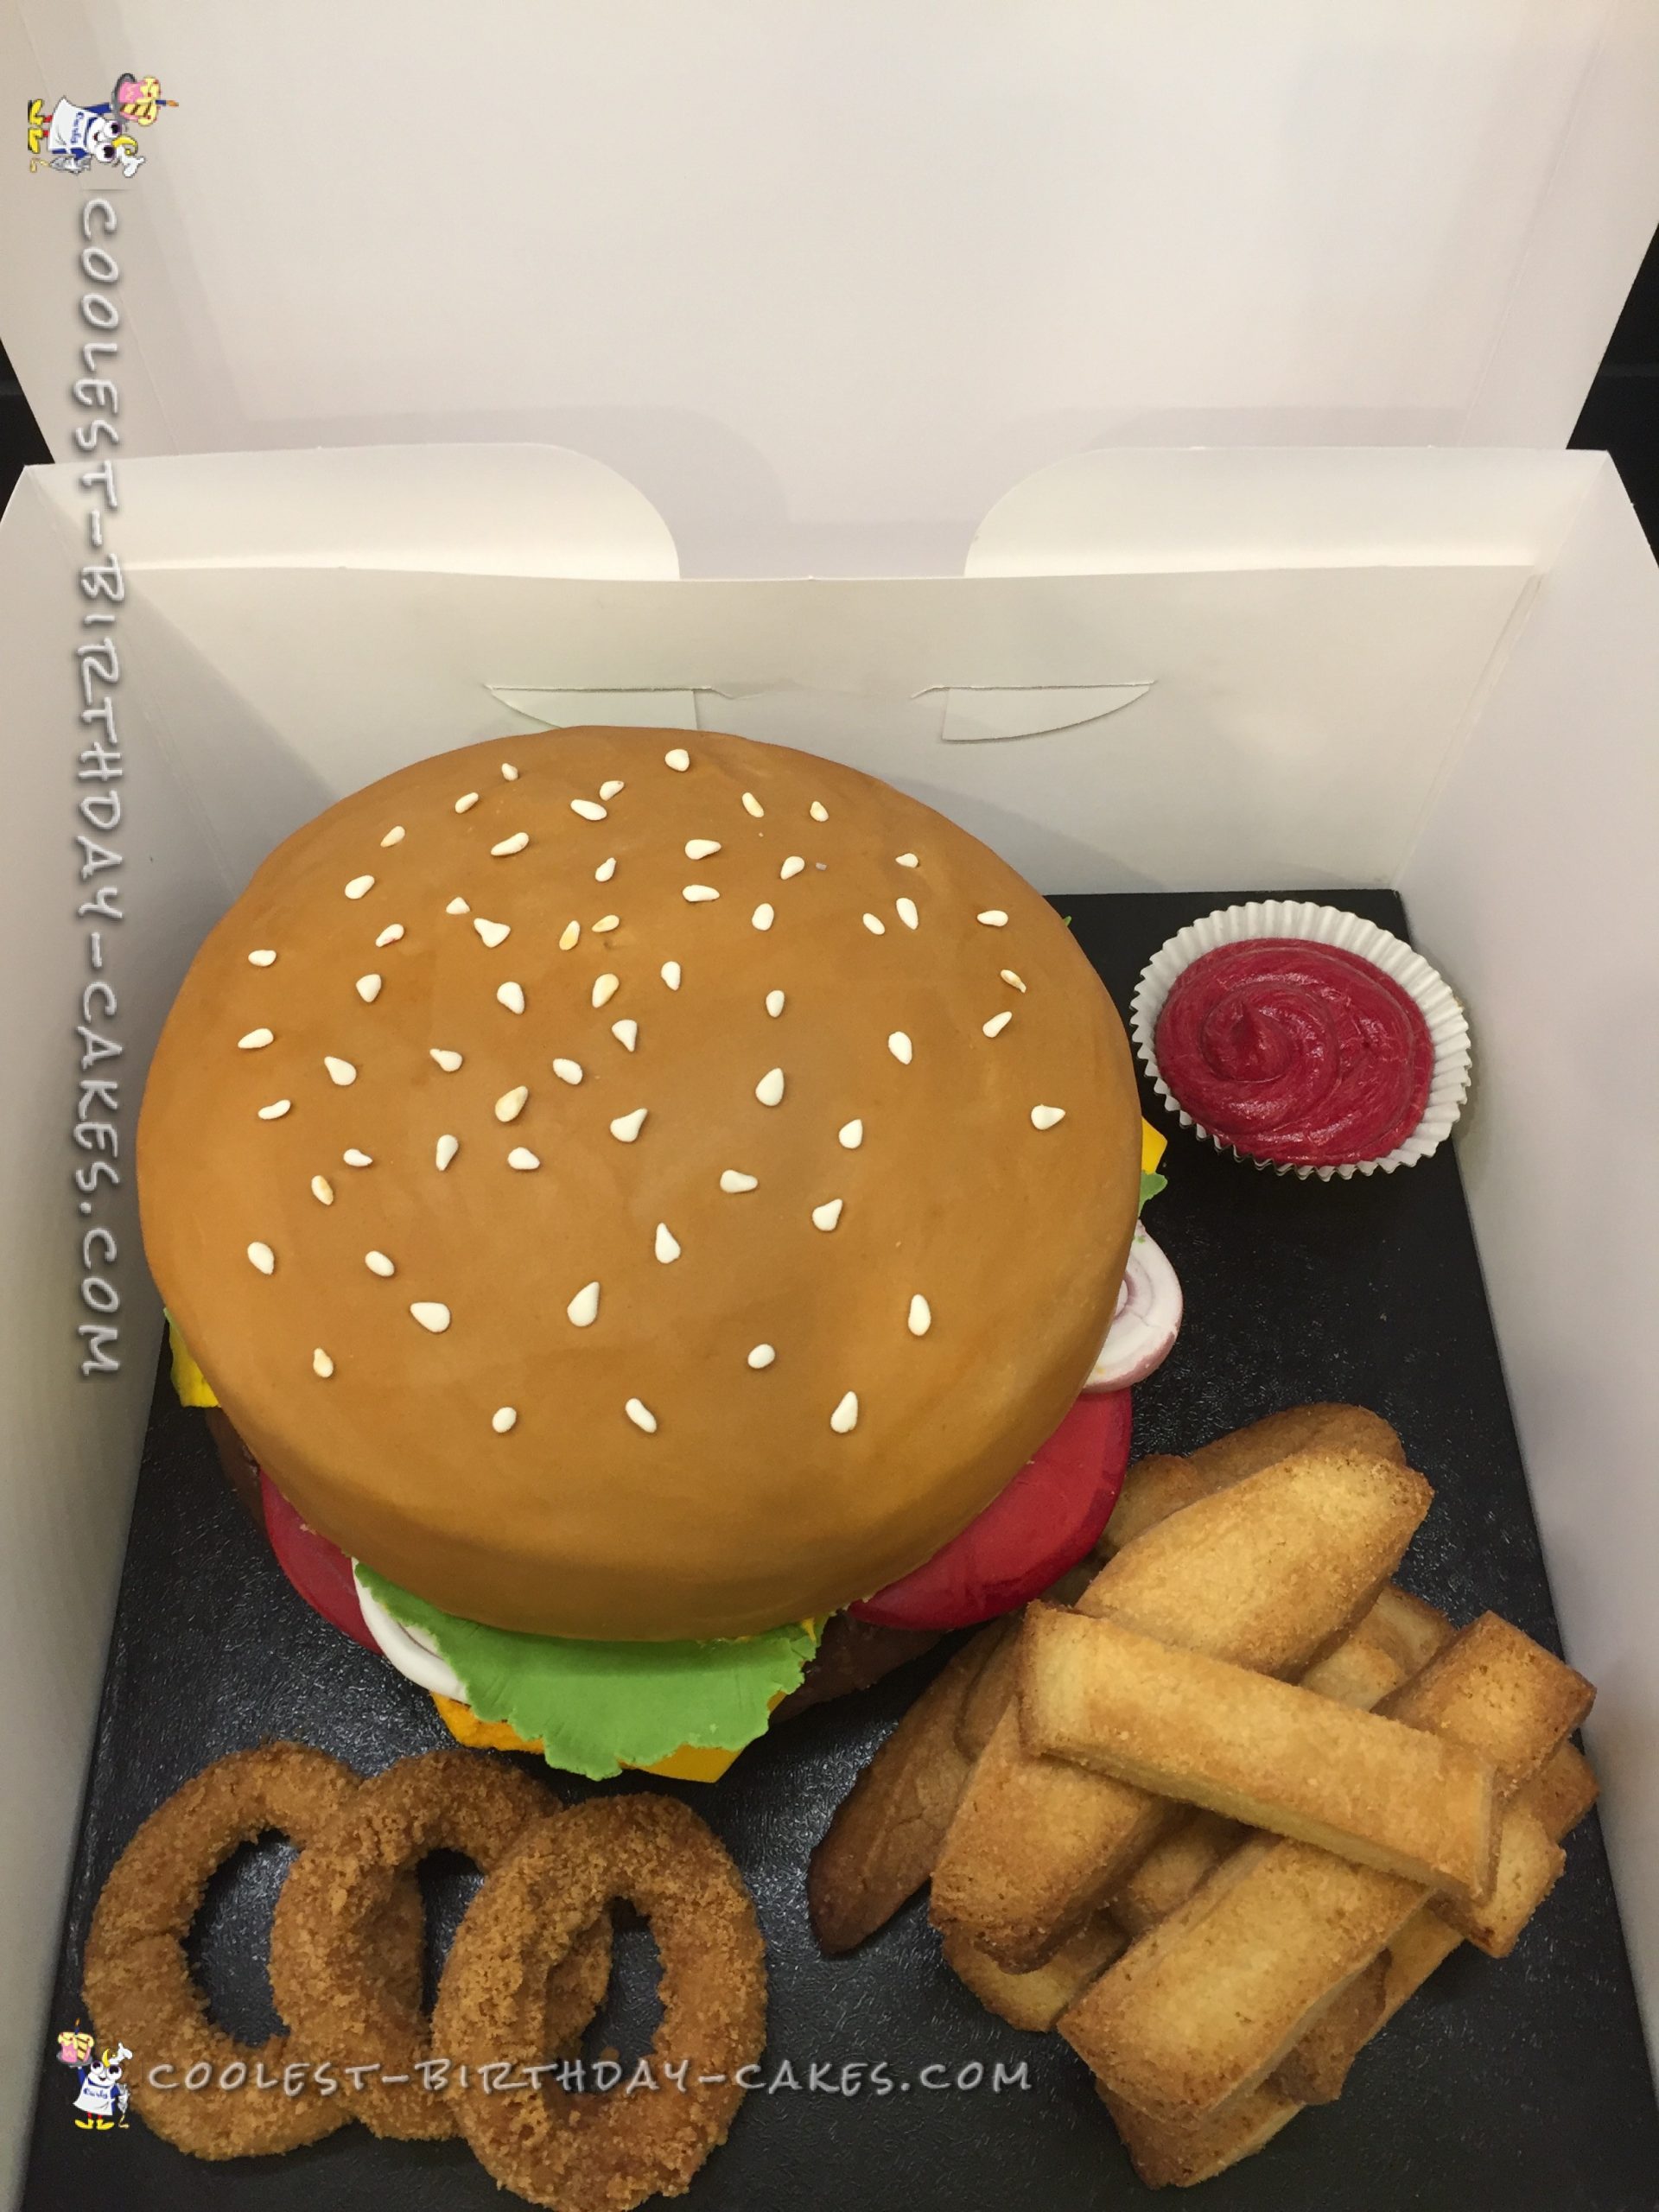 Awesome Burger Chips and Onion Rings Cake